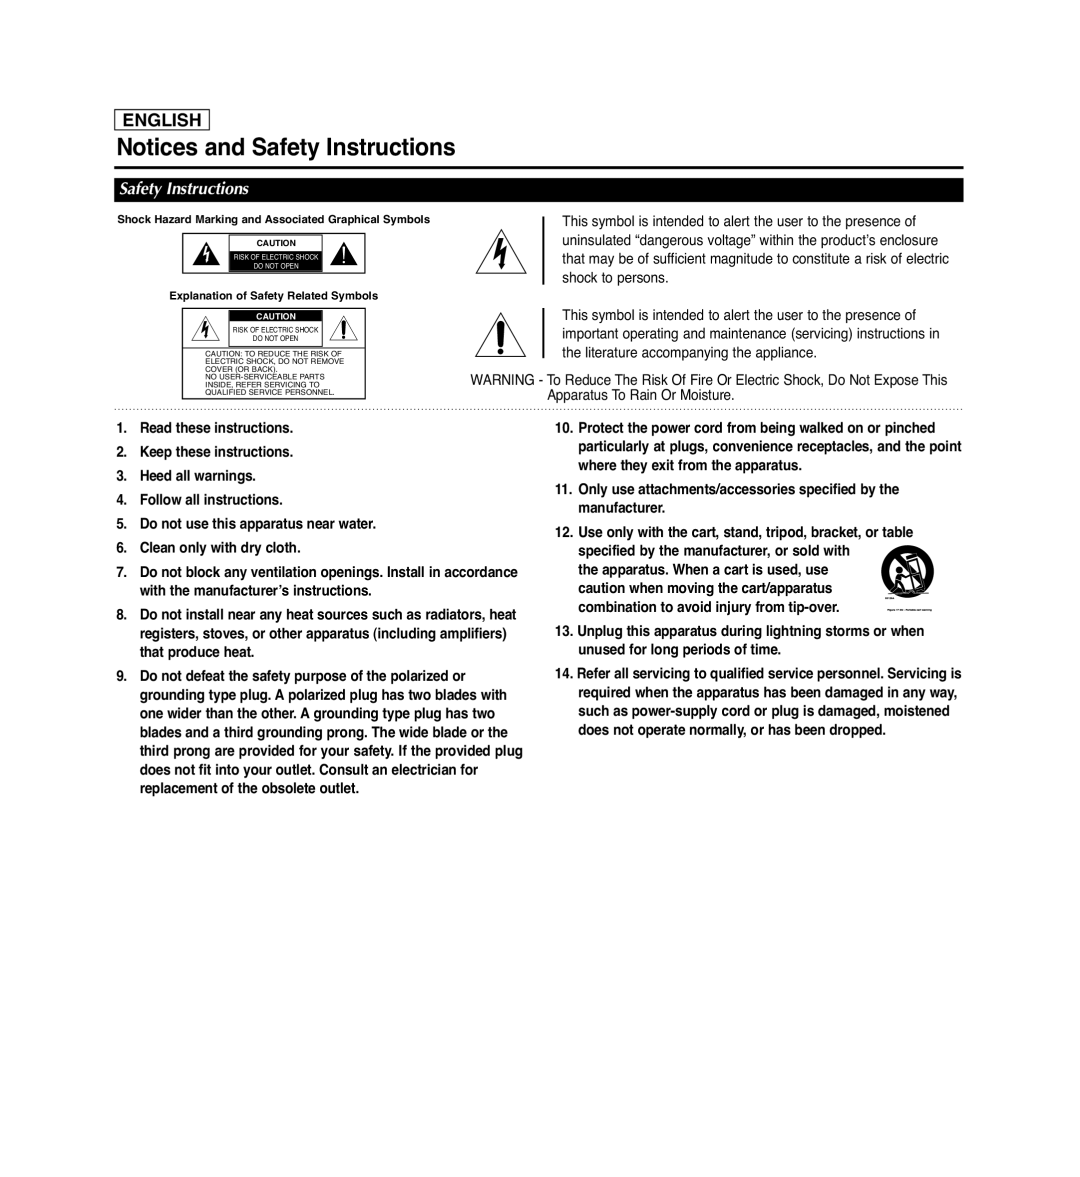 Samsung SC-D364 Notices and Safety Instructions, English, This symbol is intended to alert the user to the presence of 